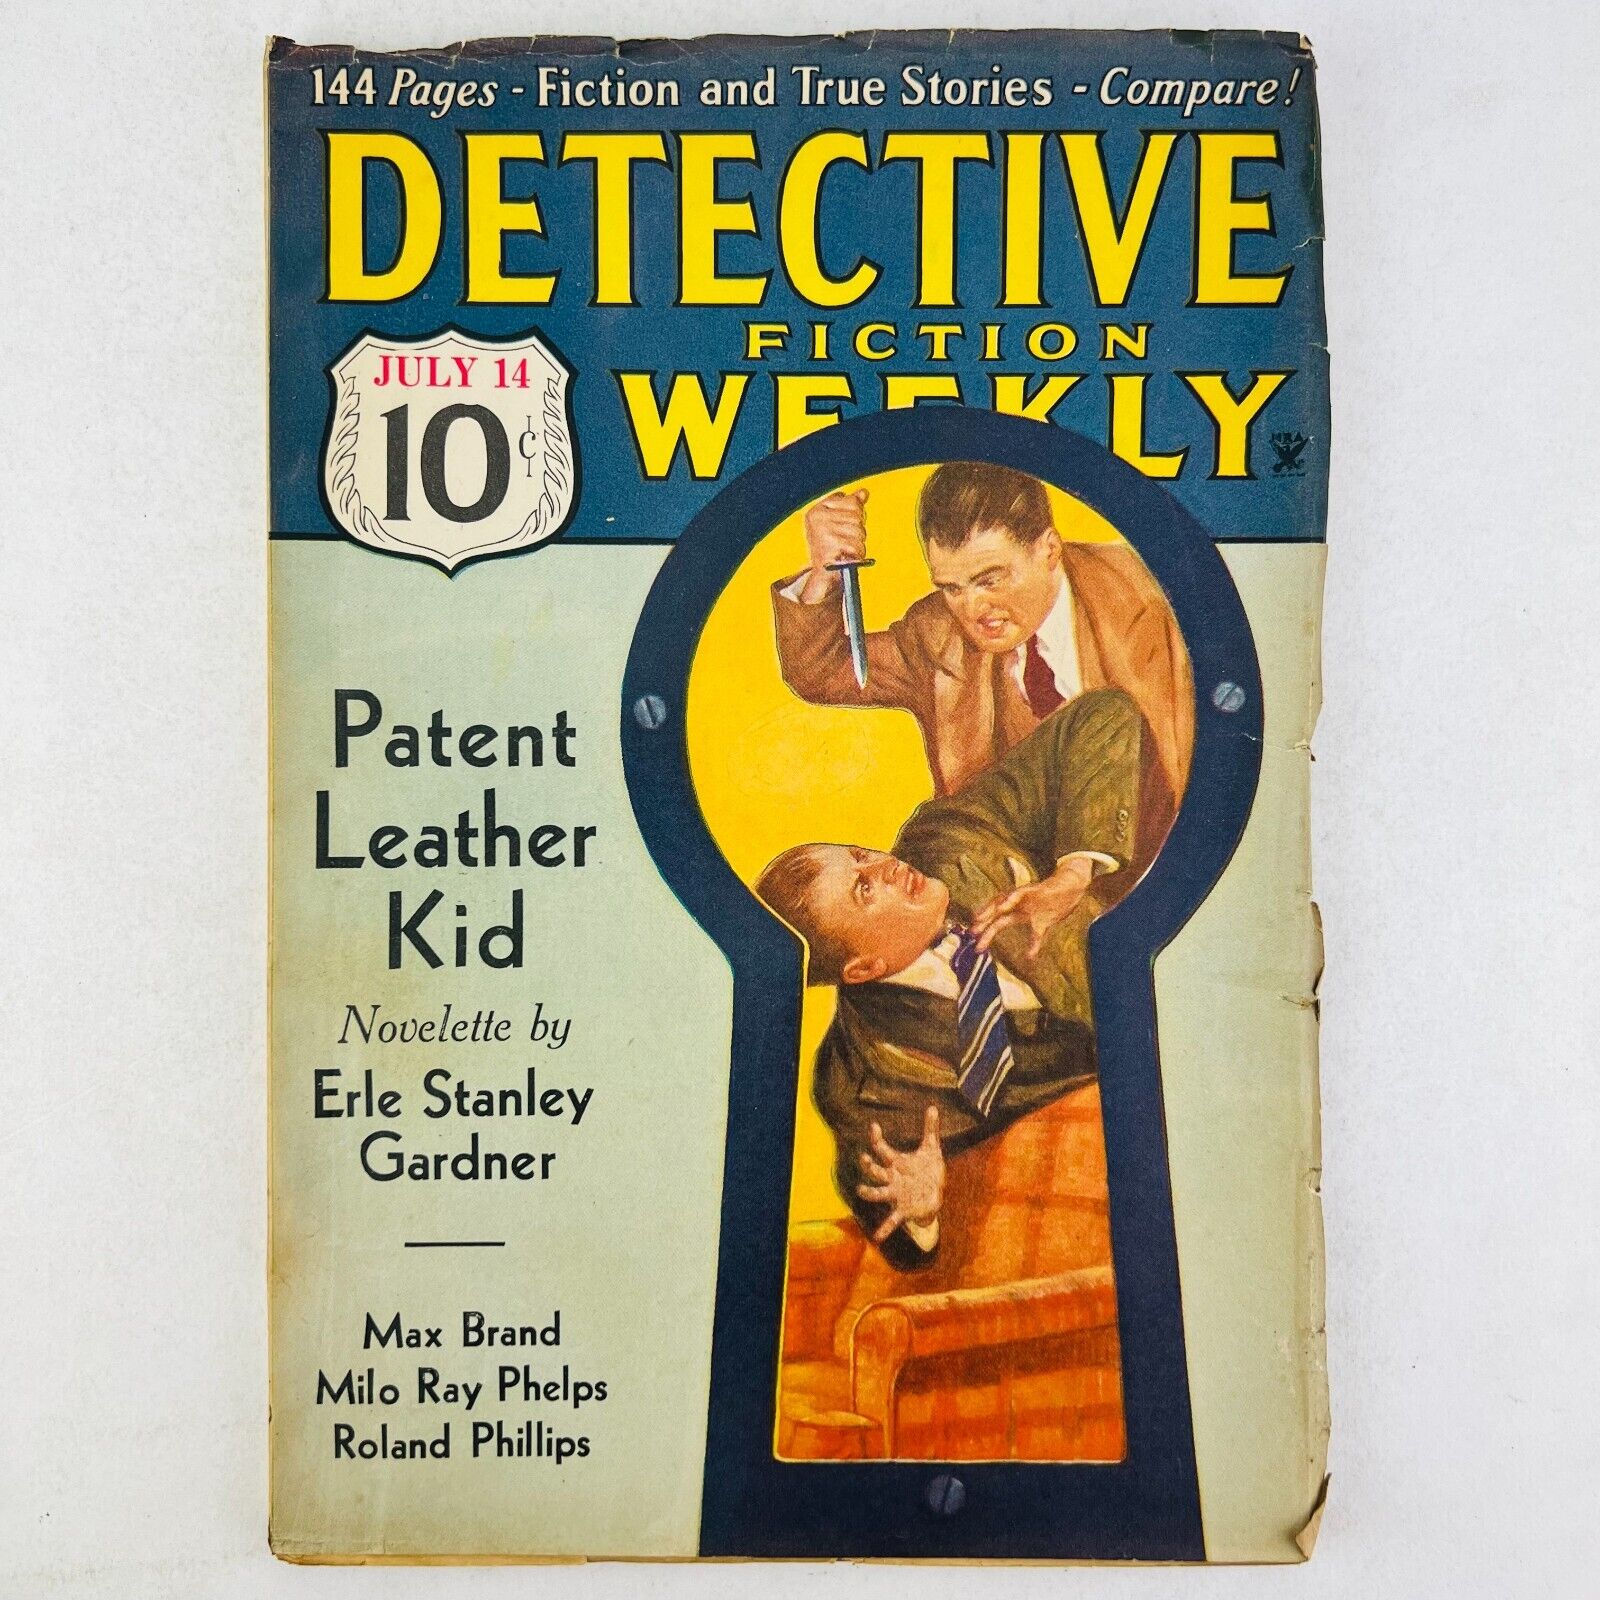 RARE PULP  DETECTIVE FICTION WEEKLY - 1934 JULY 14 - KEYHOLE COVER - FINE